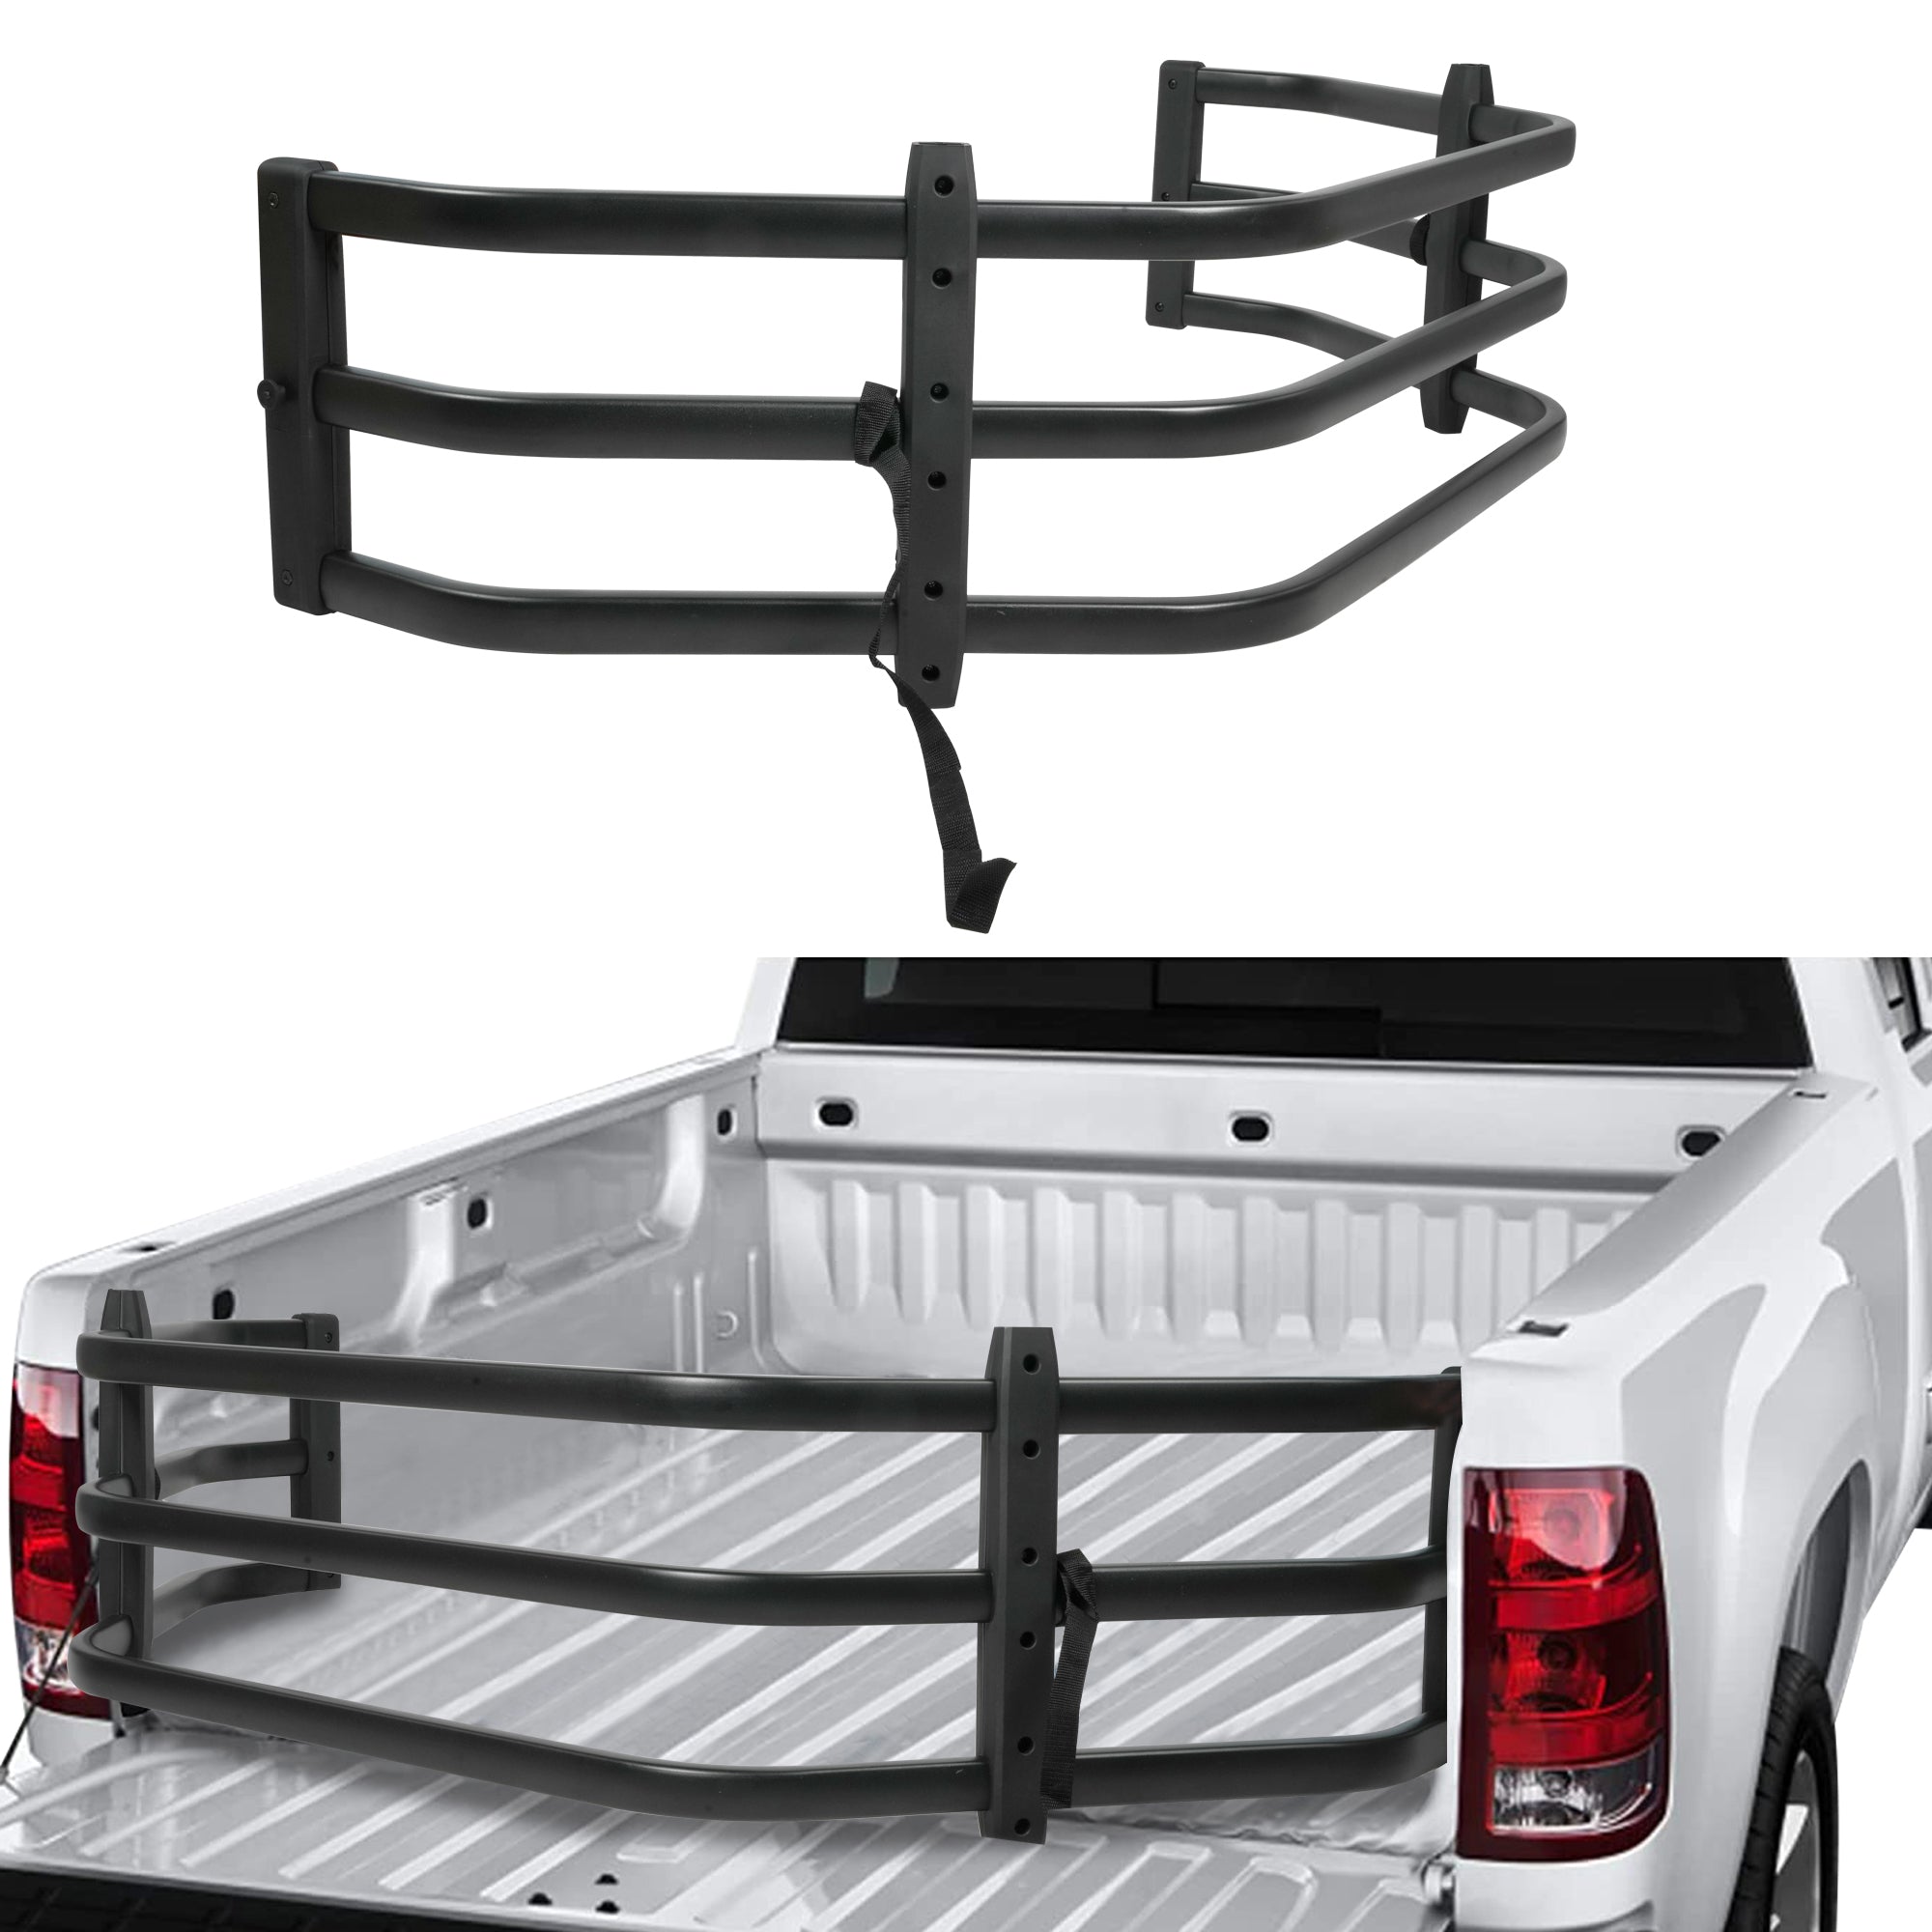 (Out of Stock) Adjustable Truck Base Extension for Tacoma, Toyota, SuperCrew, Gladiator Pickups Universal Tailgate Extension, Black